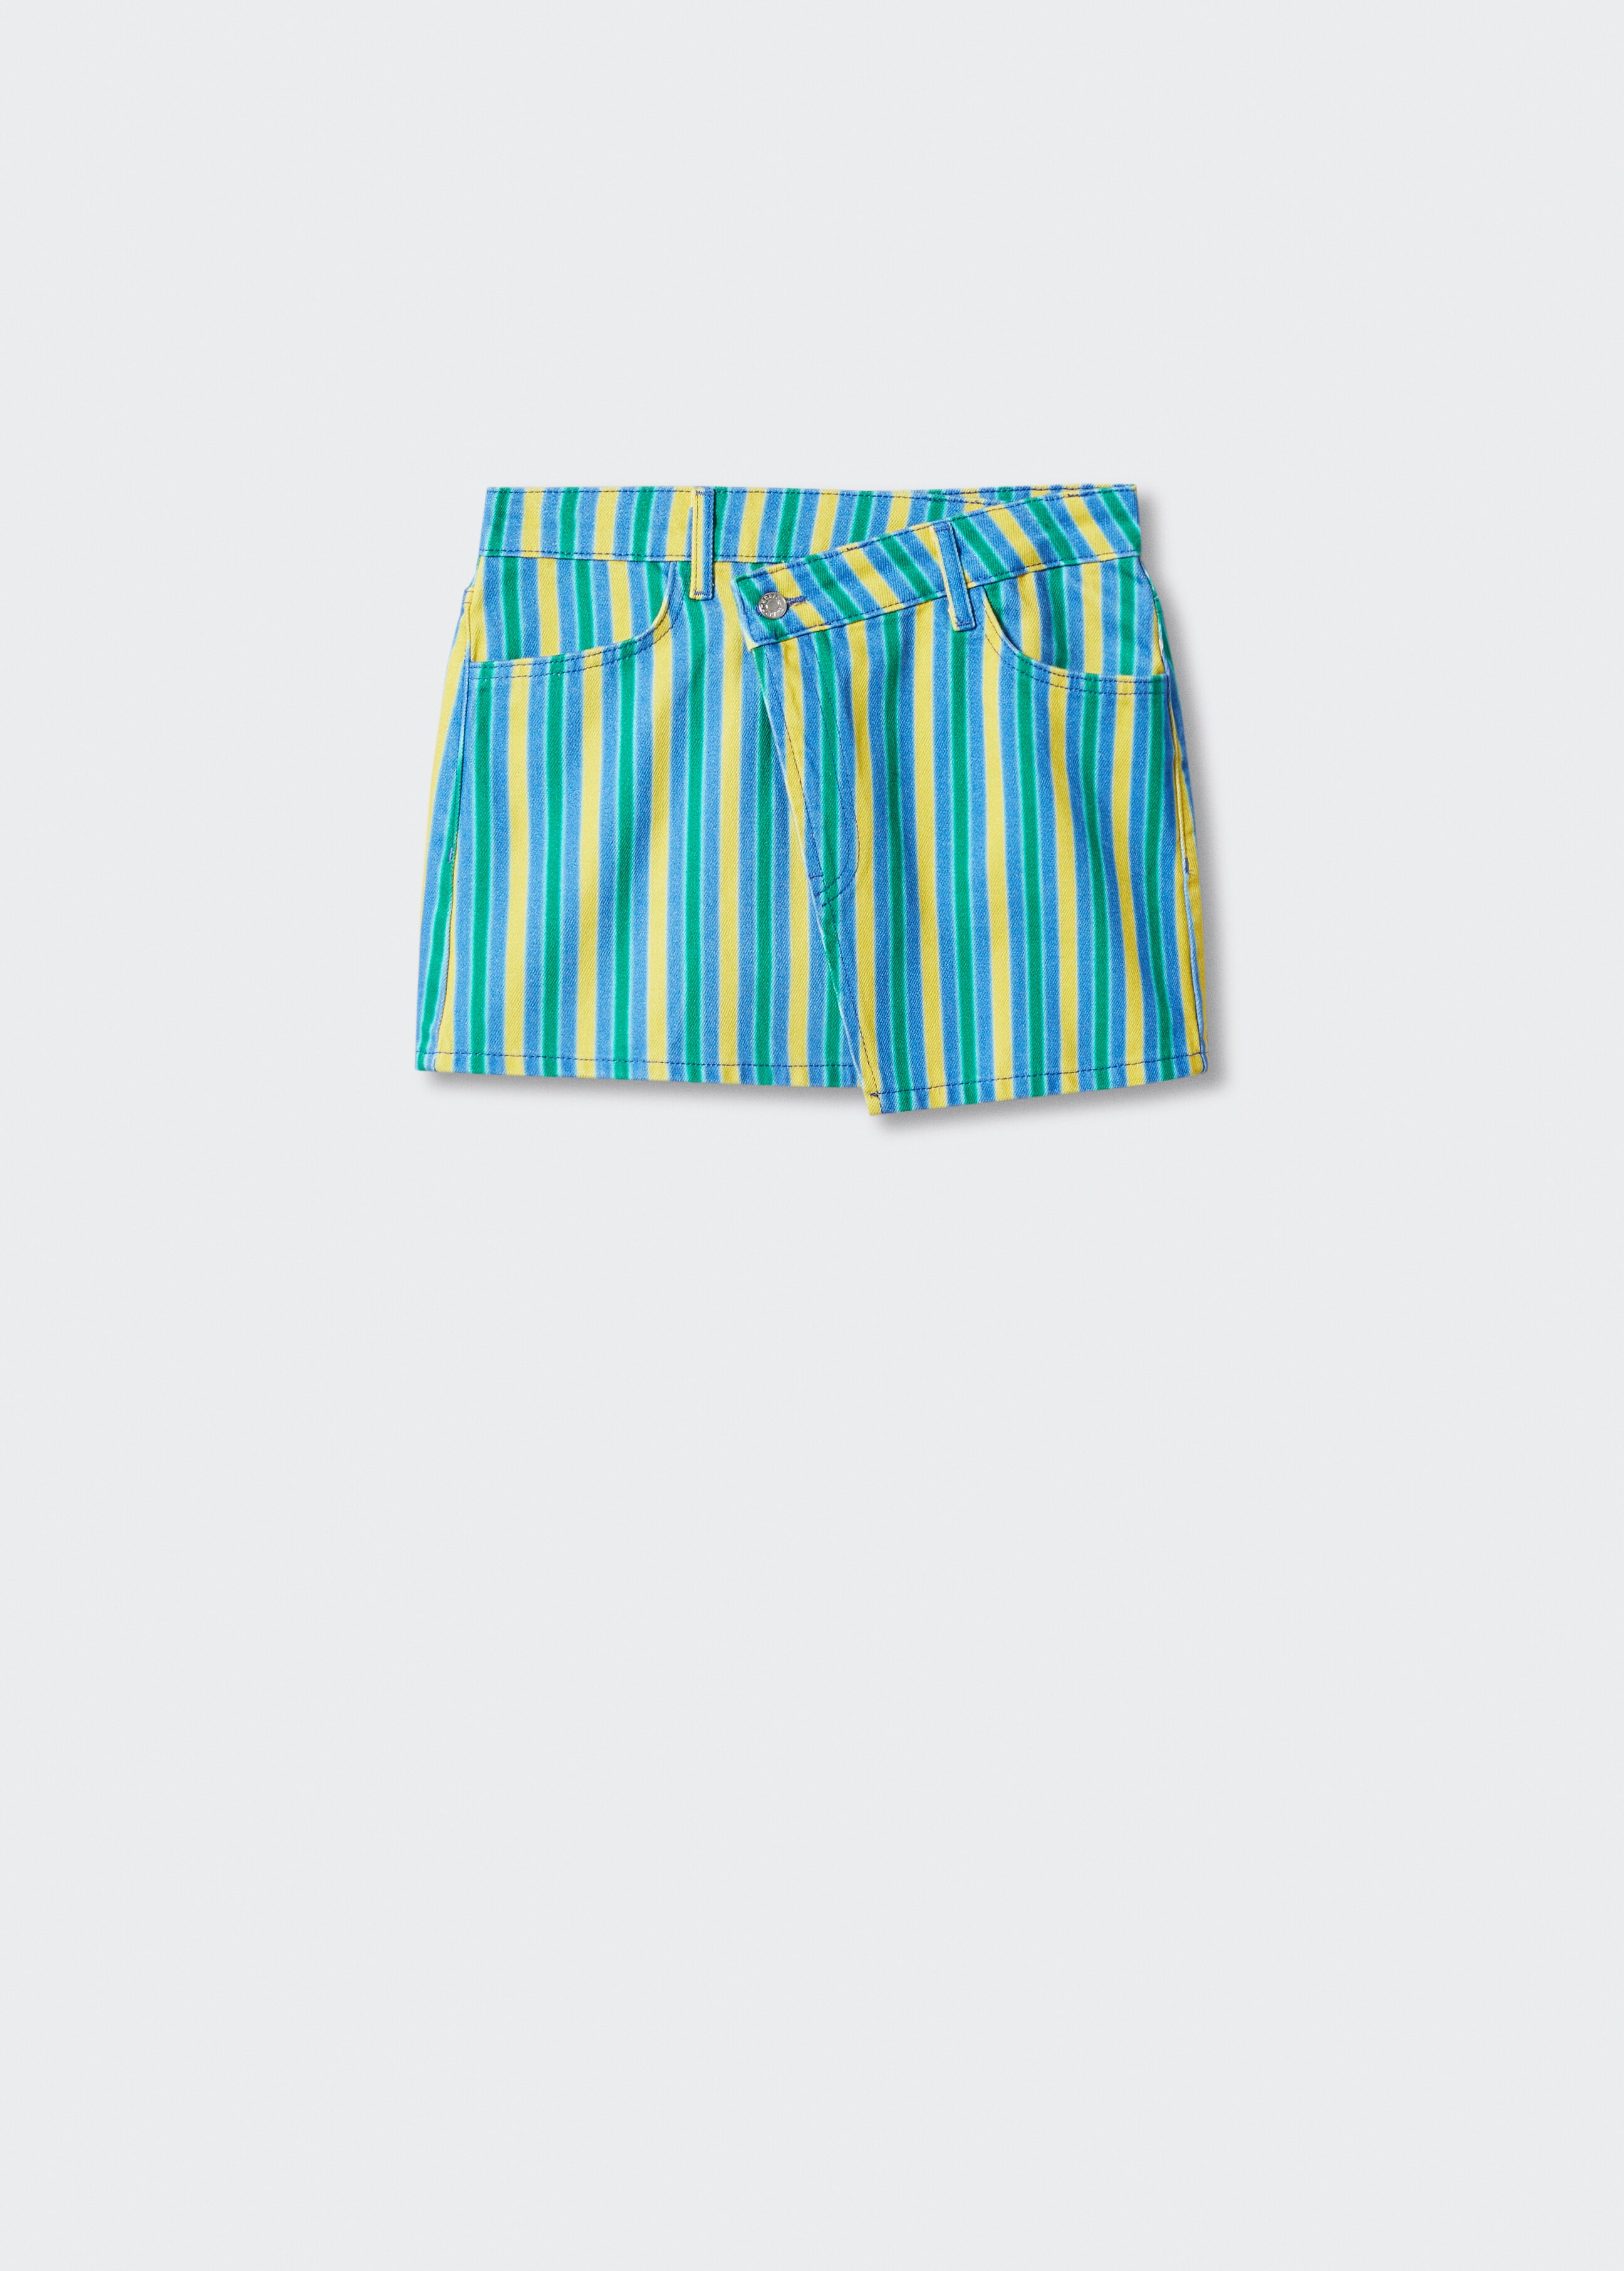 Multi-colored striped denim mini-skirt - Article without model